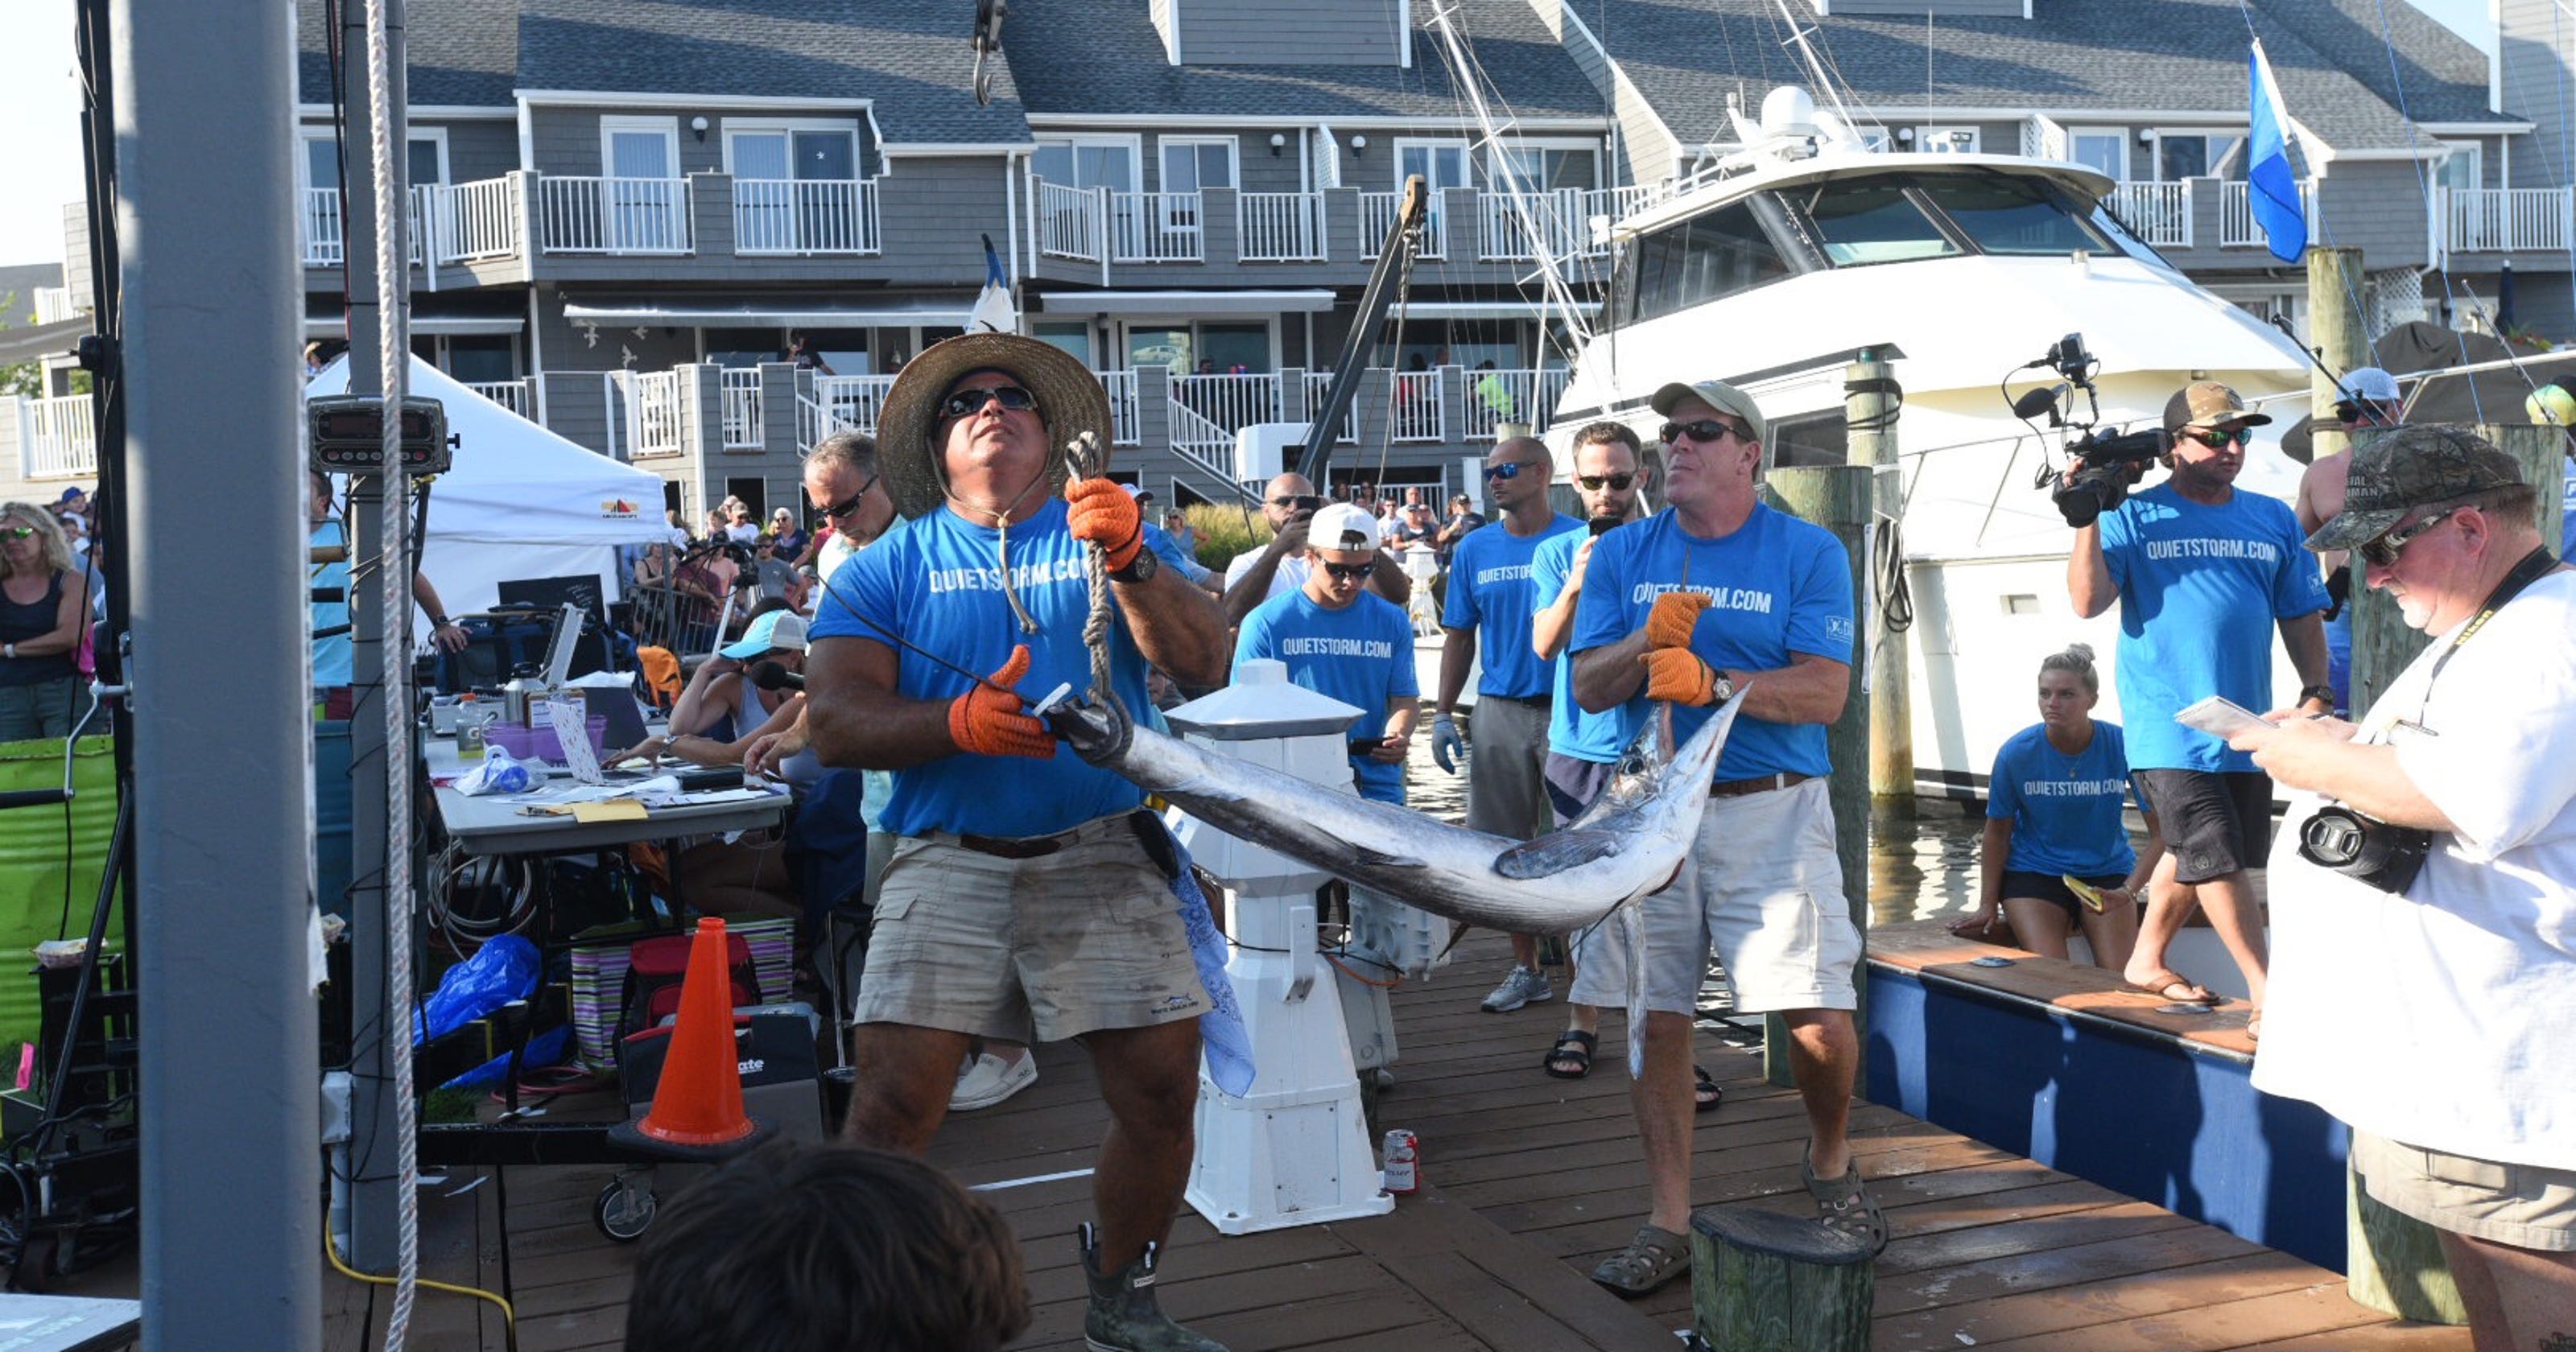 White Marlin Open 2019 in Ocean City What happened on Day 2